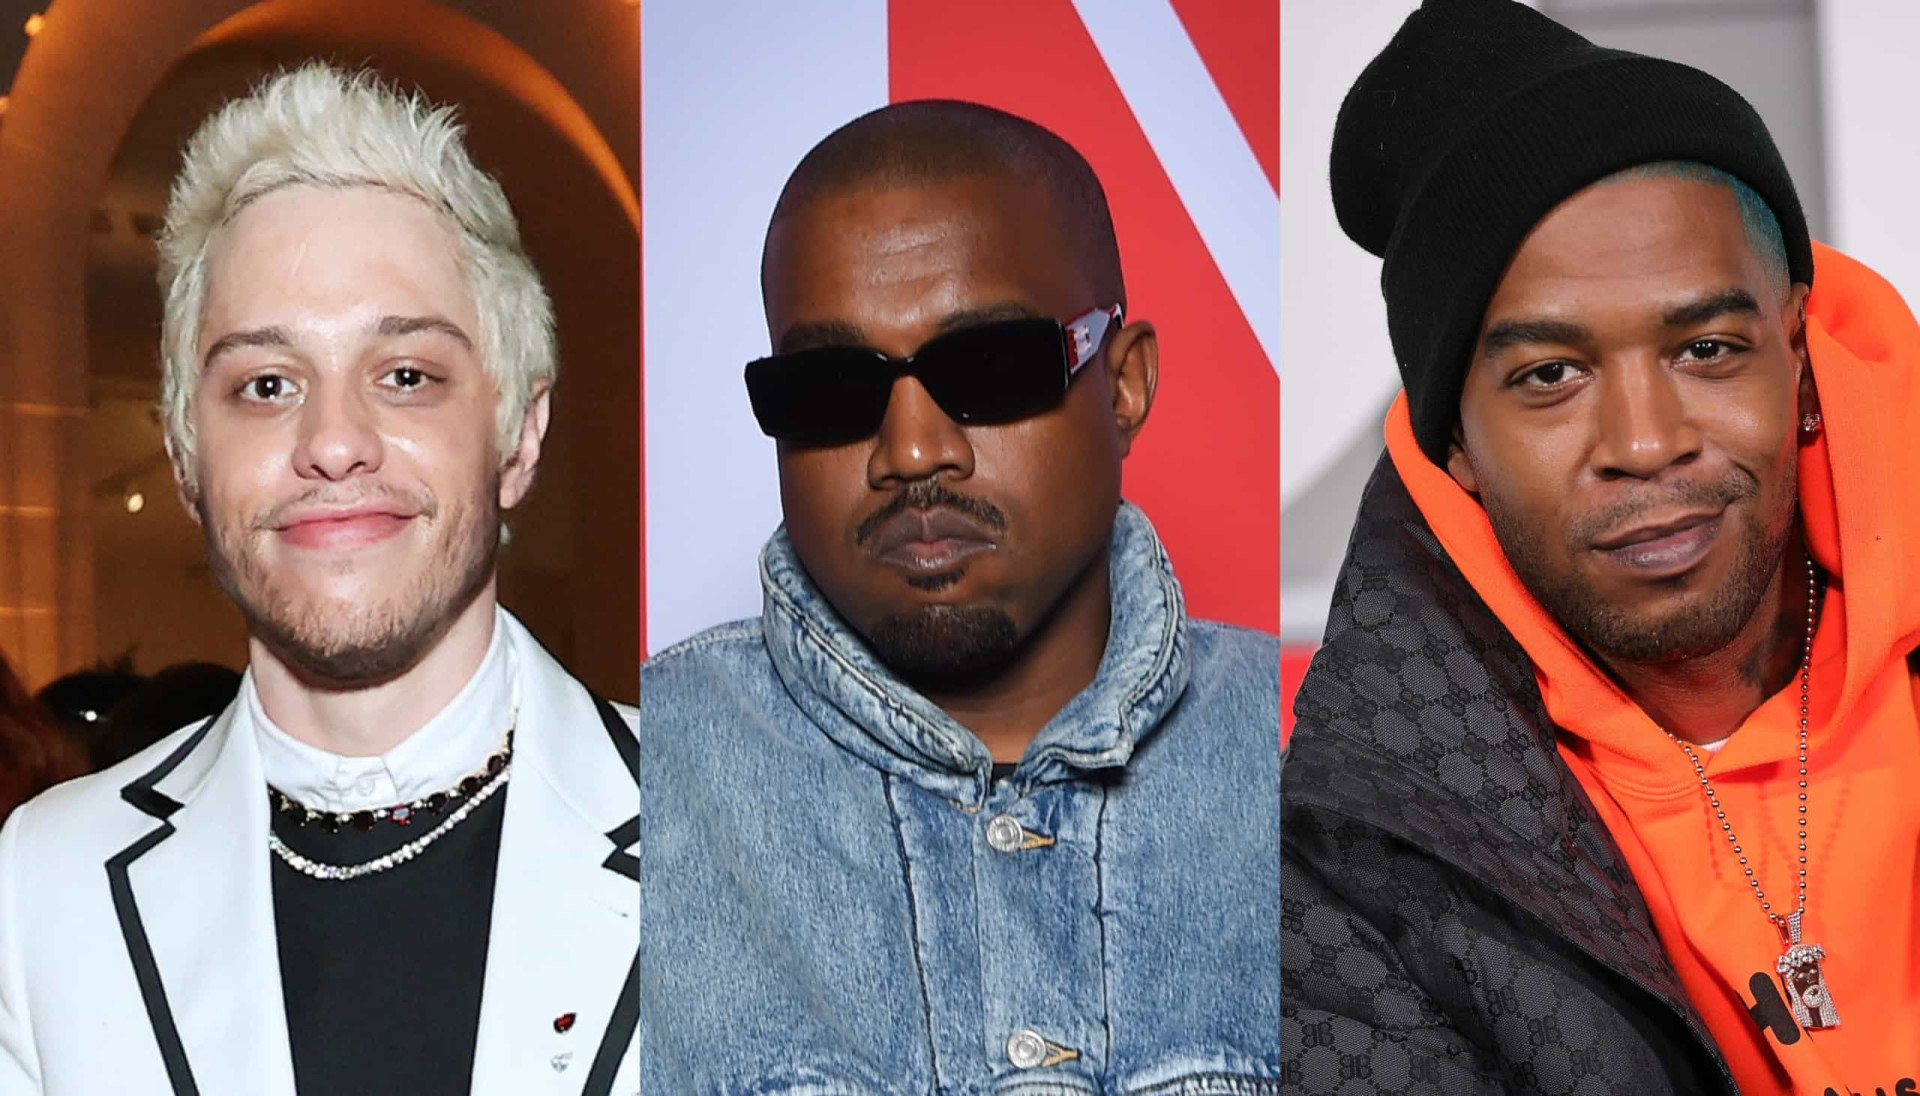 <p>During the Super Bowl weekend of 2022, Kanye "Ye" West sparked a conflict on his Instagram account, targeting Pete Davidson for obvious reasons and surprisingly, his longtime friend and collaborator, Kid Cudi. On February 12, in a since-deleted note to Instagram, Ye tagged Cudi as well as Kim Kardashian and wrote, "Just so everyone knows Cudi will not be on Donda [2] because he’s friends with you know who,” as per Billboard.  Cudi, who last collaborated with Ye on his 2021 'Donda' album, left a comment on Ye’s post that read: "Too bad I dont wanna be on ur album u [ ] dinosaur hahaha." He continued, "everyone knows ive been the best thing about ur albums since i met u. Ima pray for you brother.” Then Cudi tweeted, “We talked weeks ago about this. You’re whack for flipping the script and posting this lie just for a look on the internet. You ain’t no friend. BYE."</p><p>You may also like:<a href="https://www.starsinsider.com/n/437781?utm_source=msn.com&utm_medium=display&utm_campaign=referral_description&utm_content=570915en-en"> The best instrumentals ever recorded</a></p>